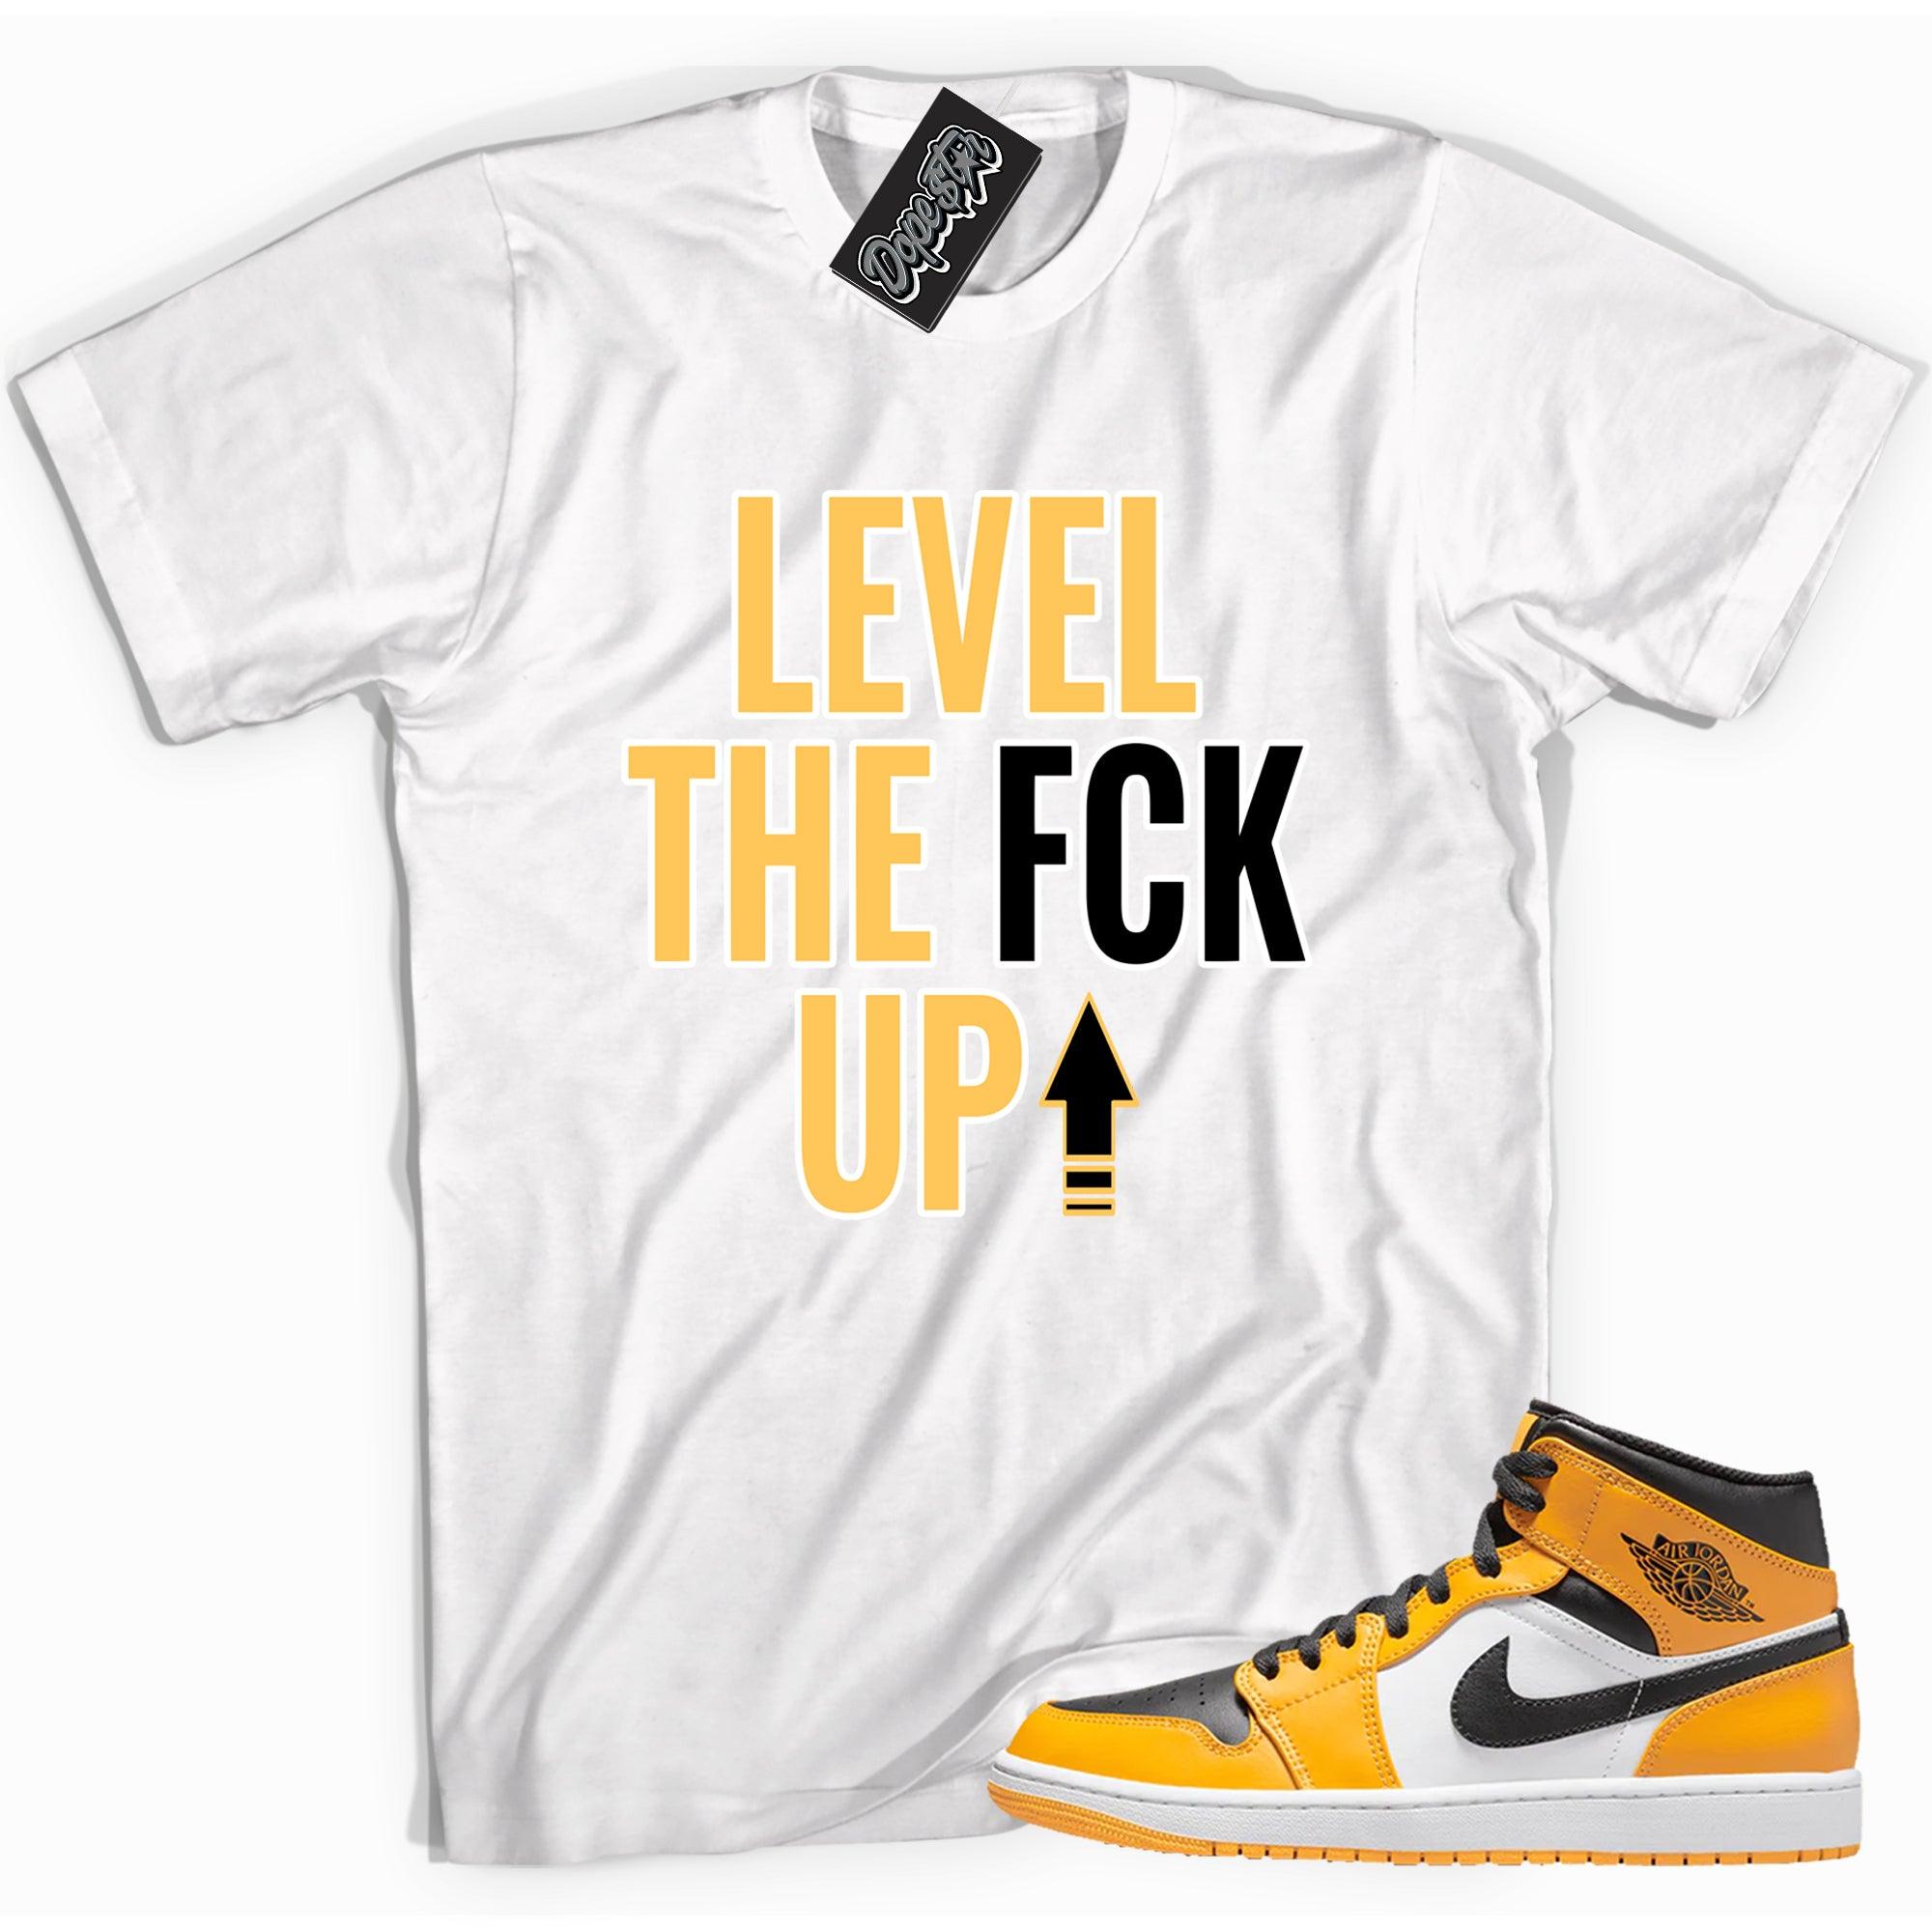 Cool white graphic tee with 'Level Up' print, that perfectly matches Air Jordan 1 MID TAXI sneakers.